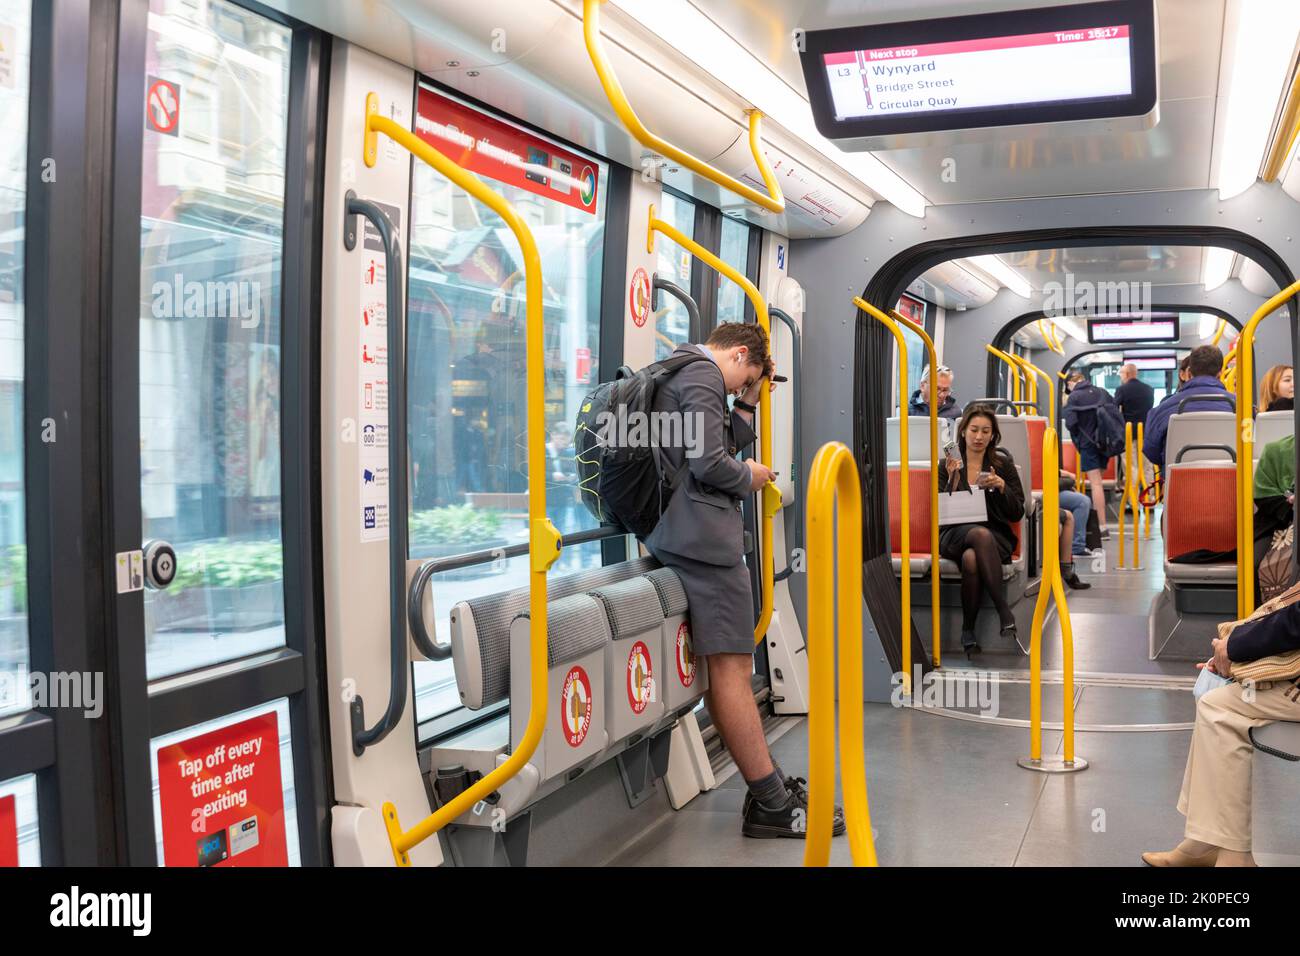 Sydney light rail train in Sydney, carriage interior with passengers travelling and schoolboy on his phone,Sydney city centre,NSW,Australia Stock Photo